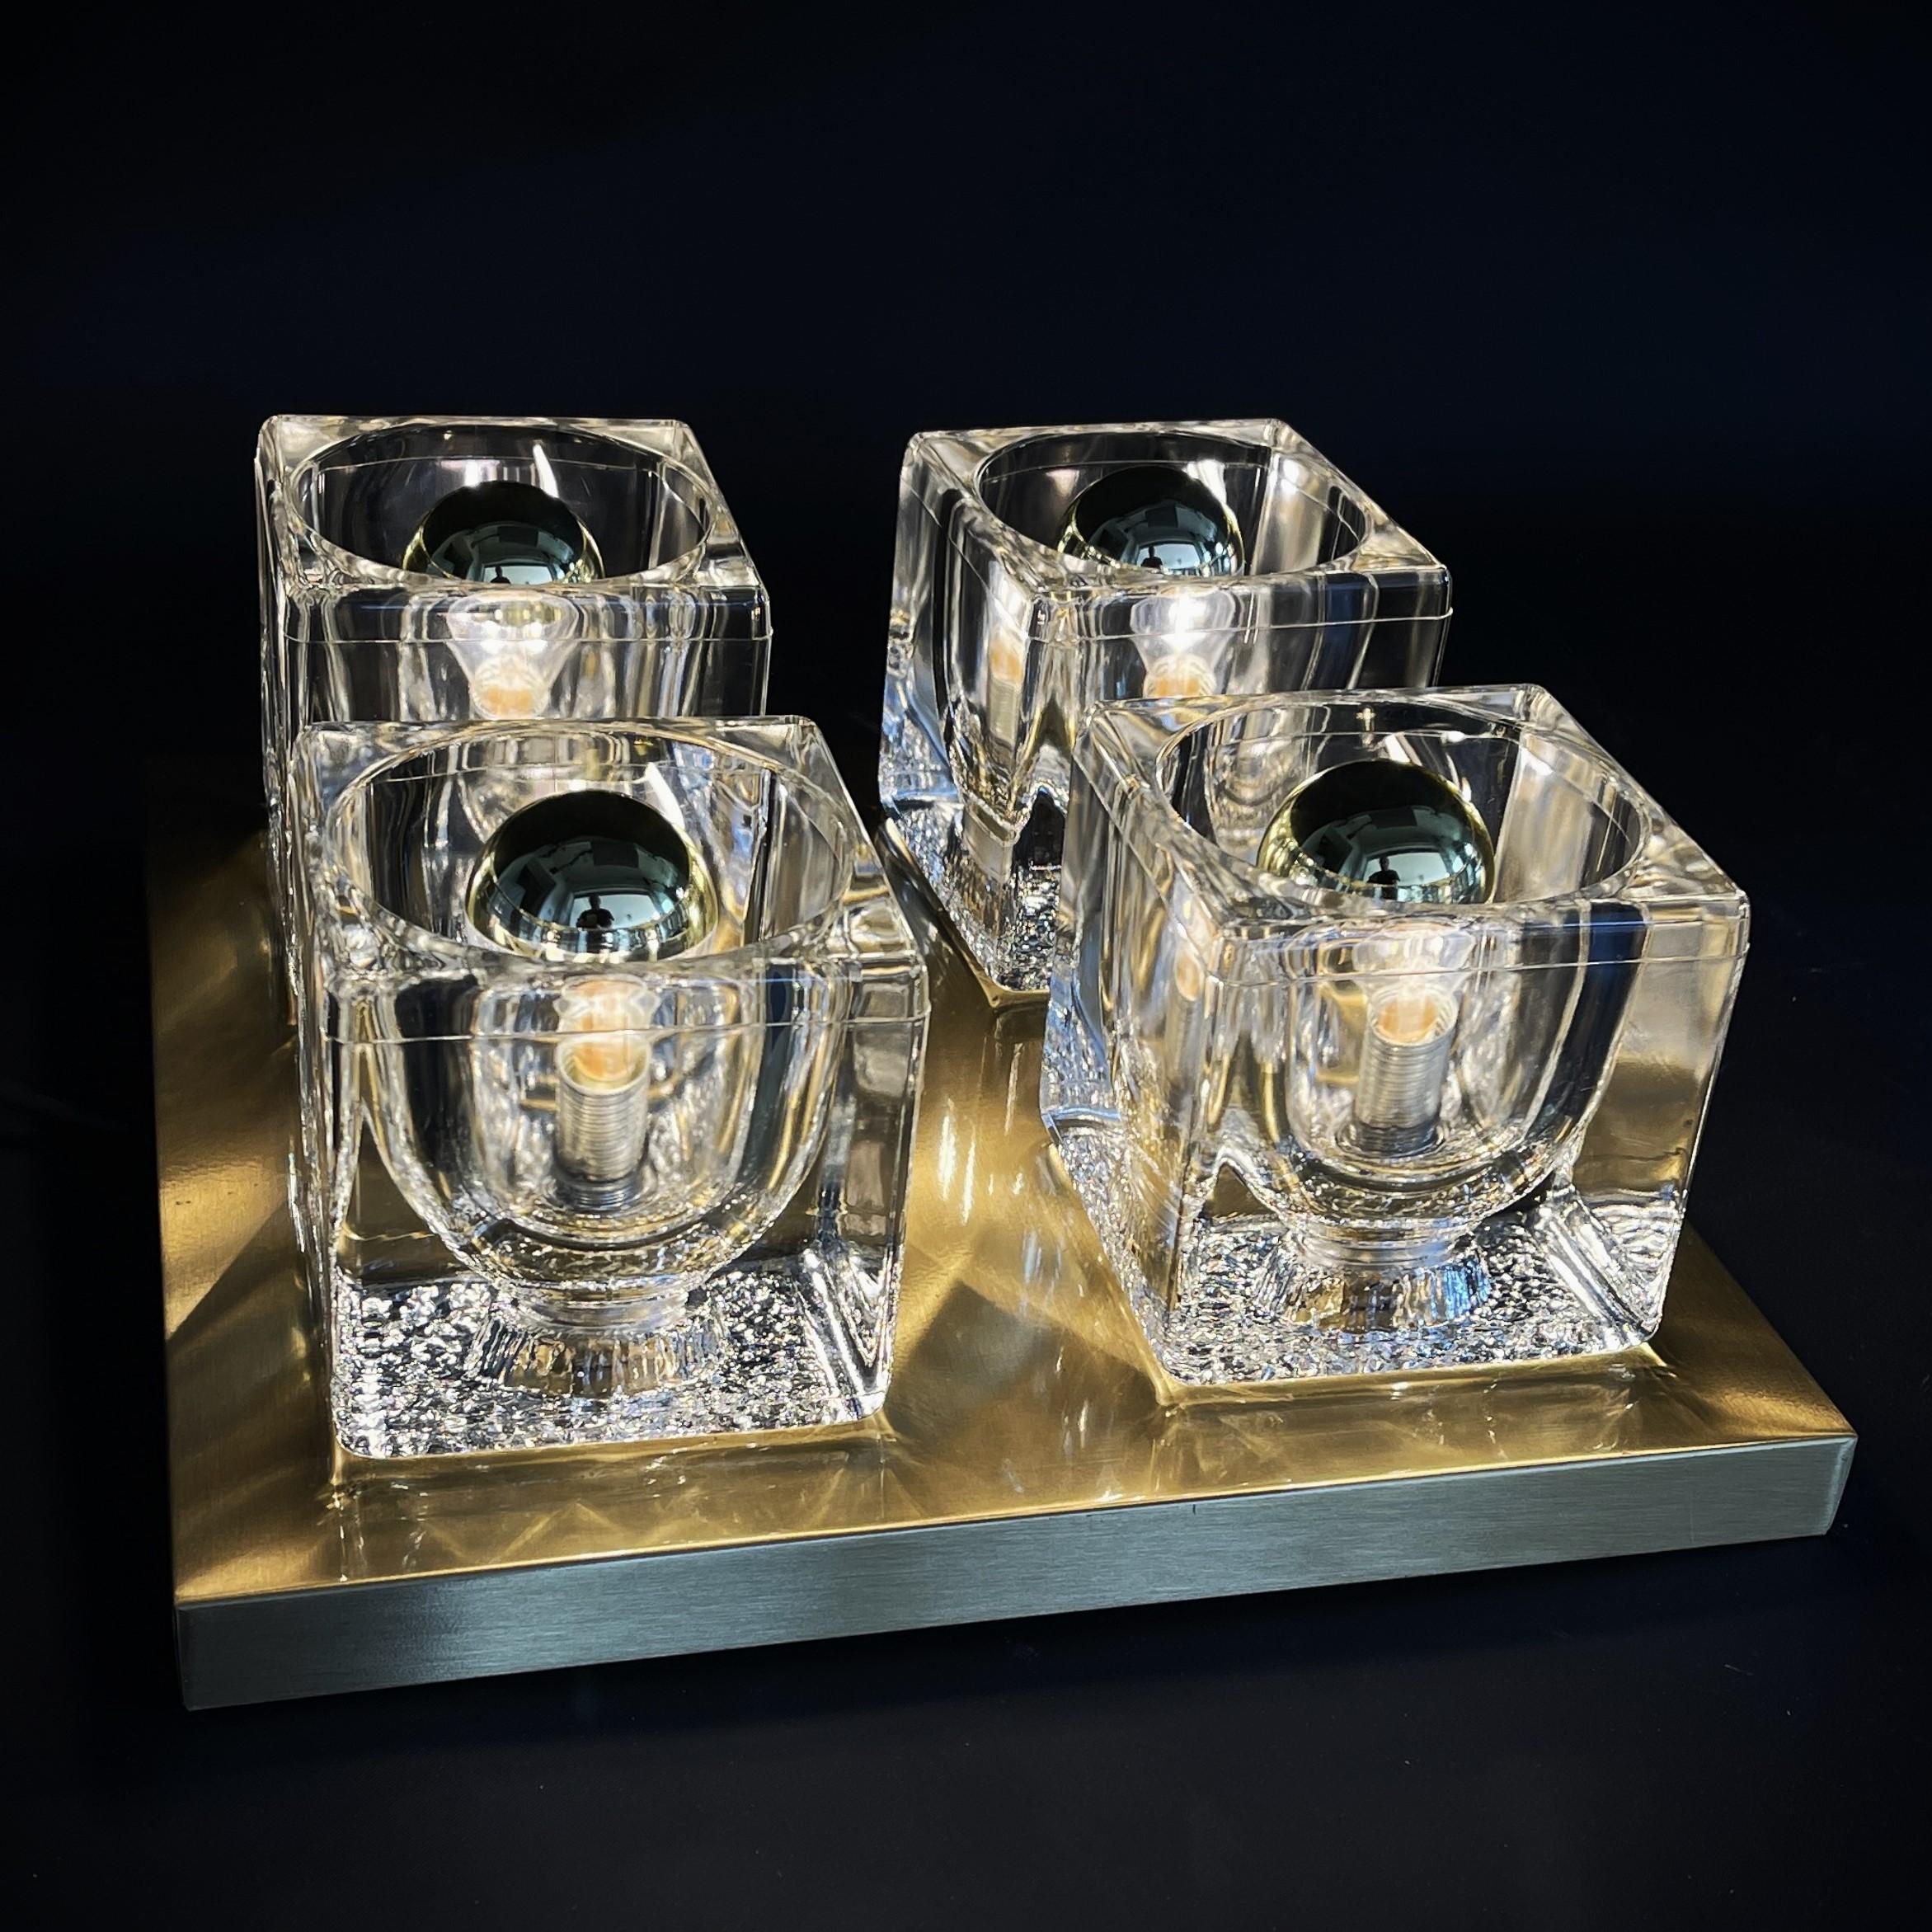 Ice glass wall- or ceiling lamp by Peill & Putzler, 1970s.

This designer lamp is a real classic from the 70s. The lounge lamp by Peill & Putzler is made of high-quality glass in the shape of an ice cube. The clear glass cubes create a beautiful